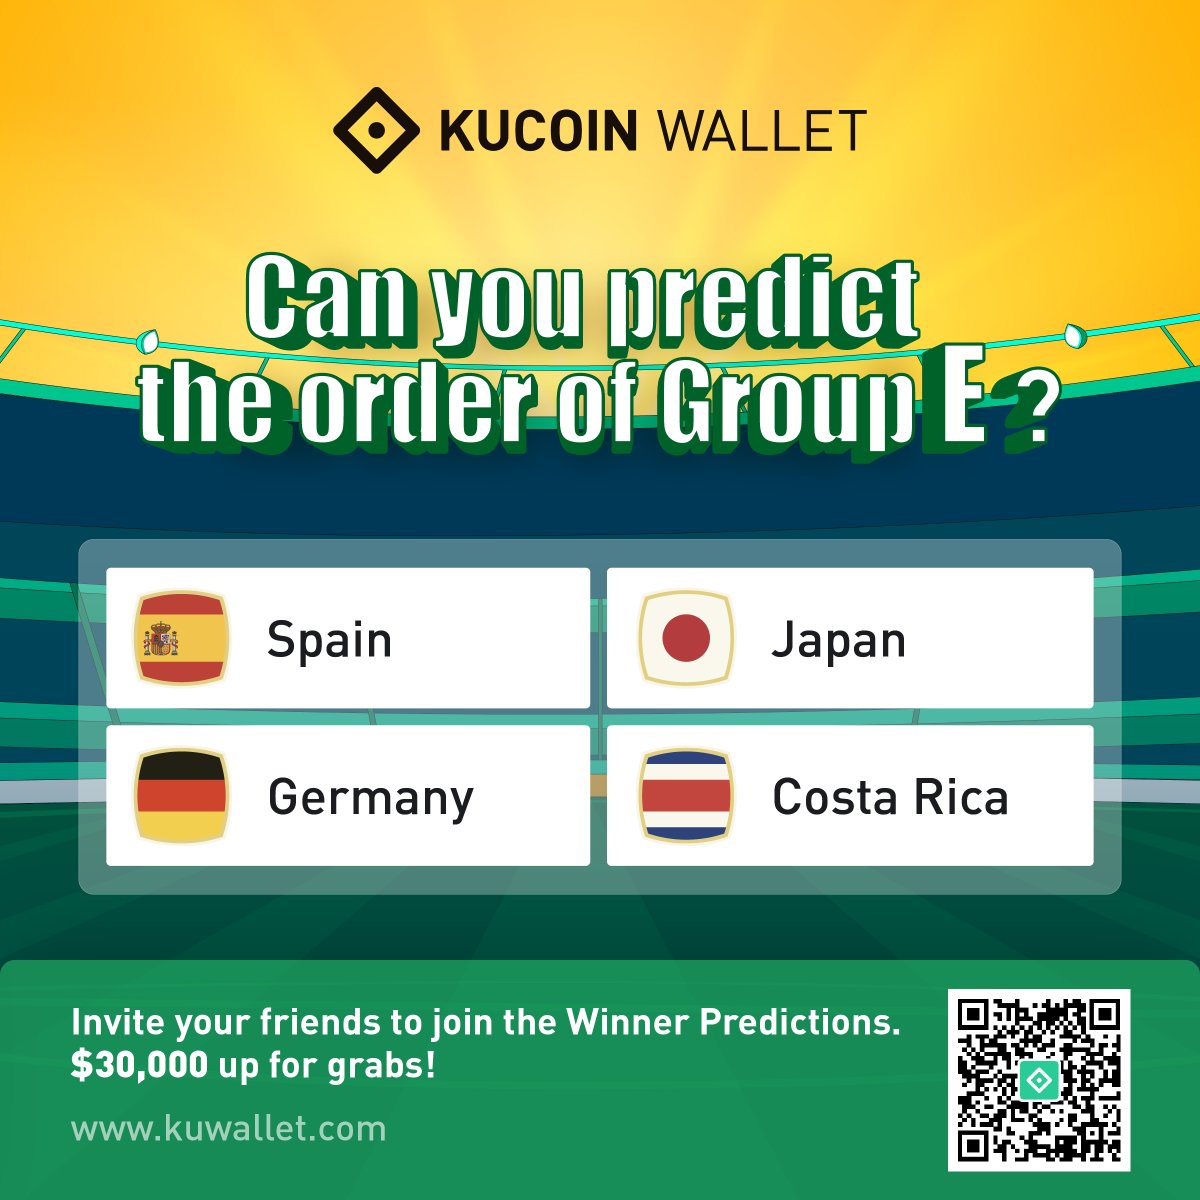 🥳Call All Master Predictors! A hard decision stands in front of you! 🇪🇸Spain vs 🇯🇵Japan 🇩🇪Germany vs 🇨🇷Costa Rica Which teams are the final 2 winners of #FIFAWorldCup Group E? Predict on #KuCoinWallet and win a share of $30,000! ➤activity.kuwallet.com/worldcup